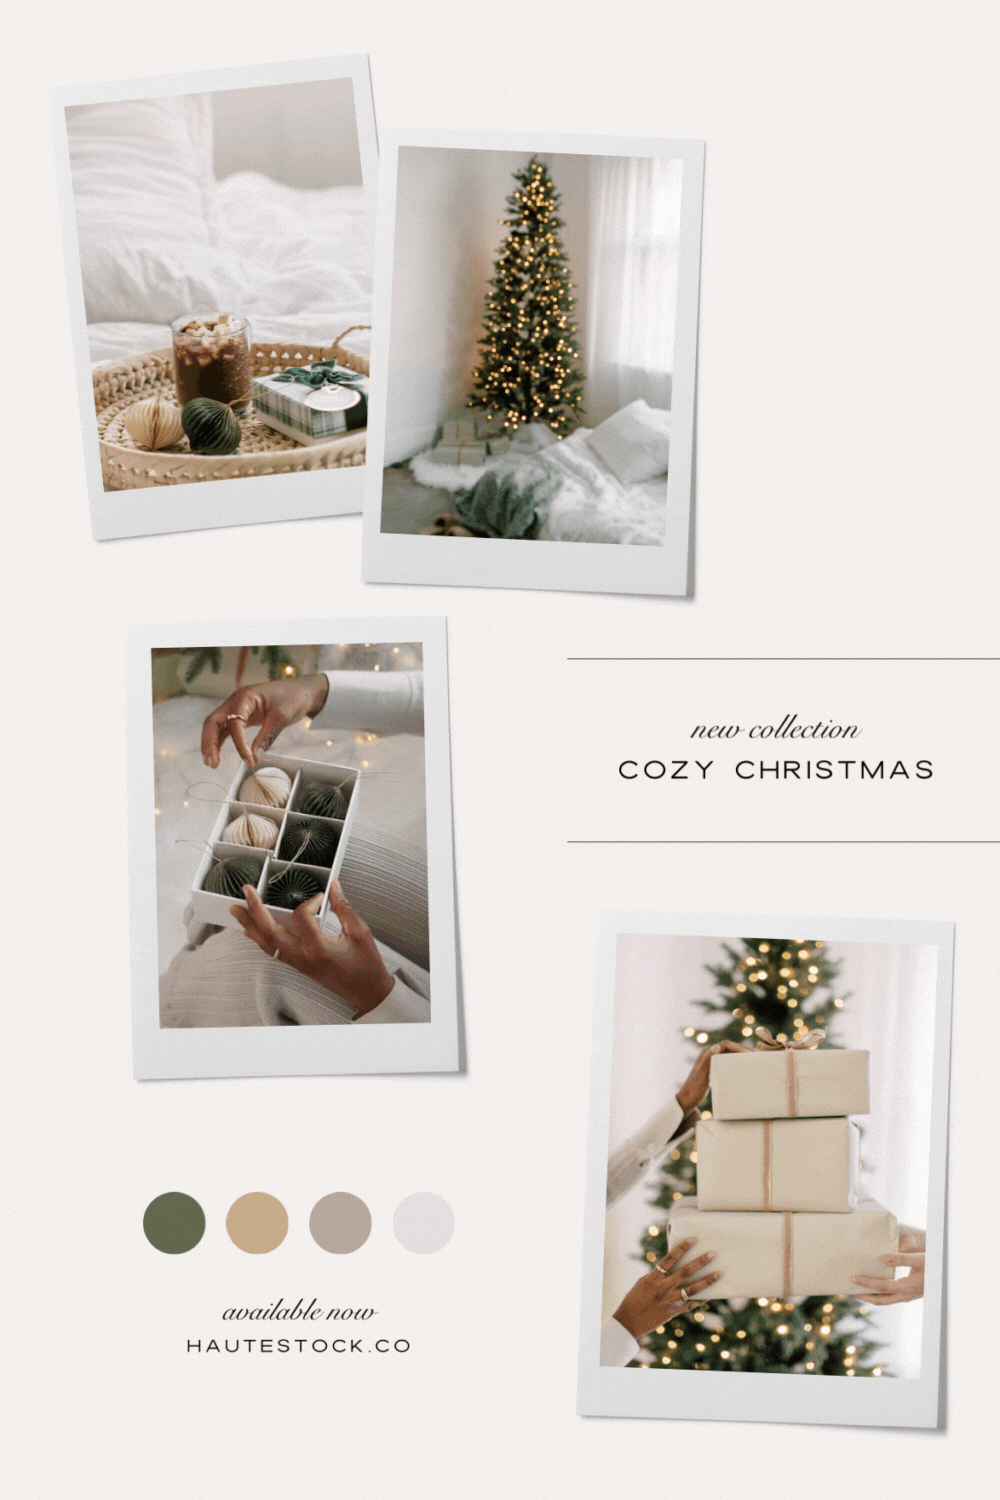 Cozy Christmas mood board, featuring soft and warm holiday stock photos and videos in green and neutrals color palette.